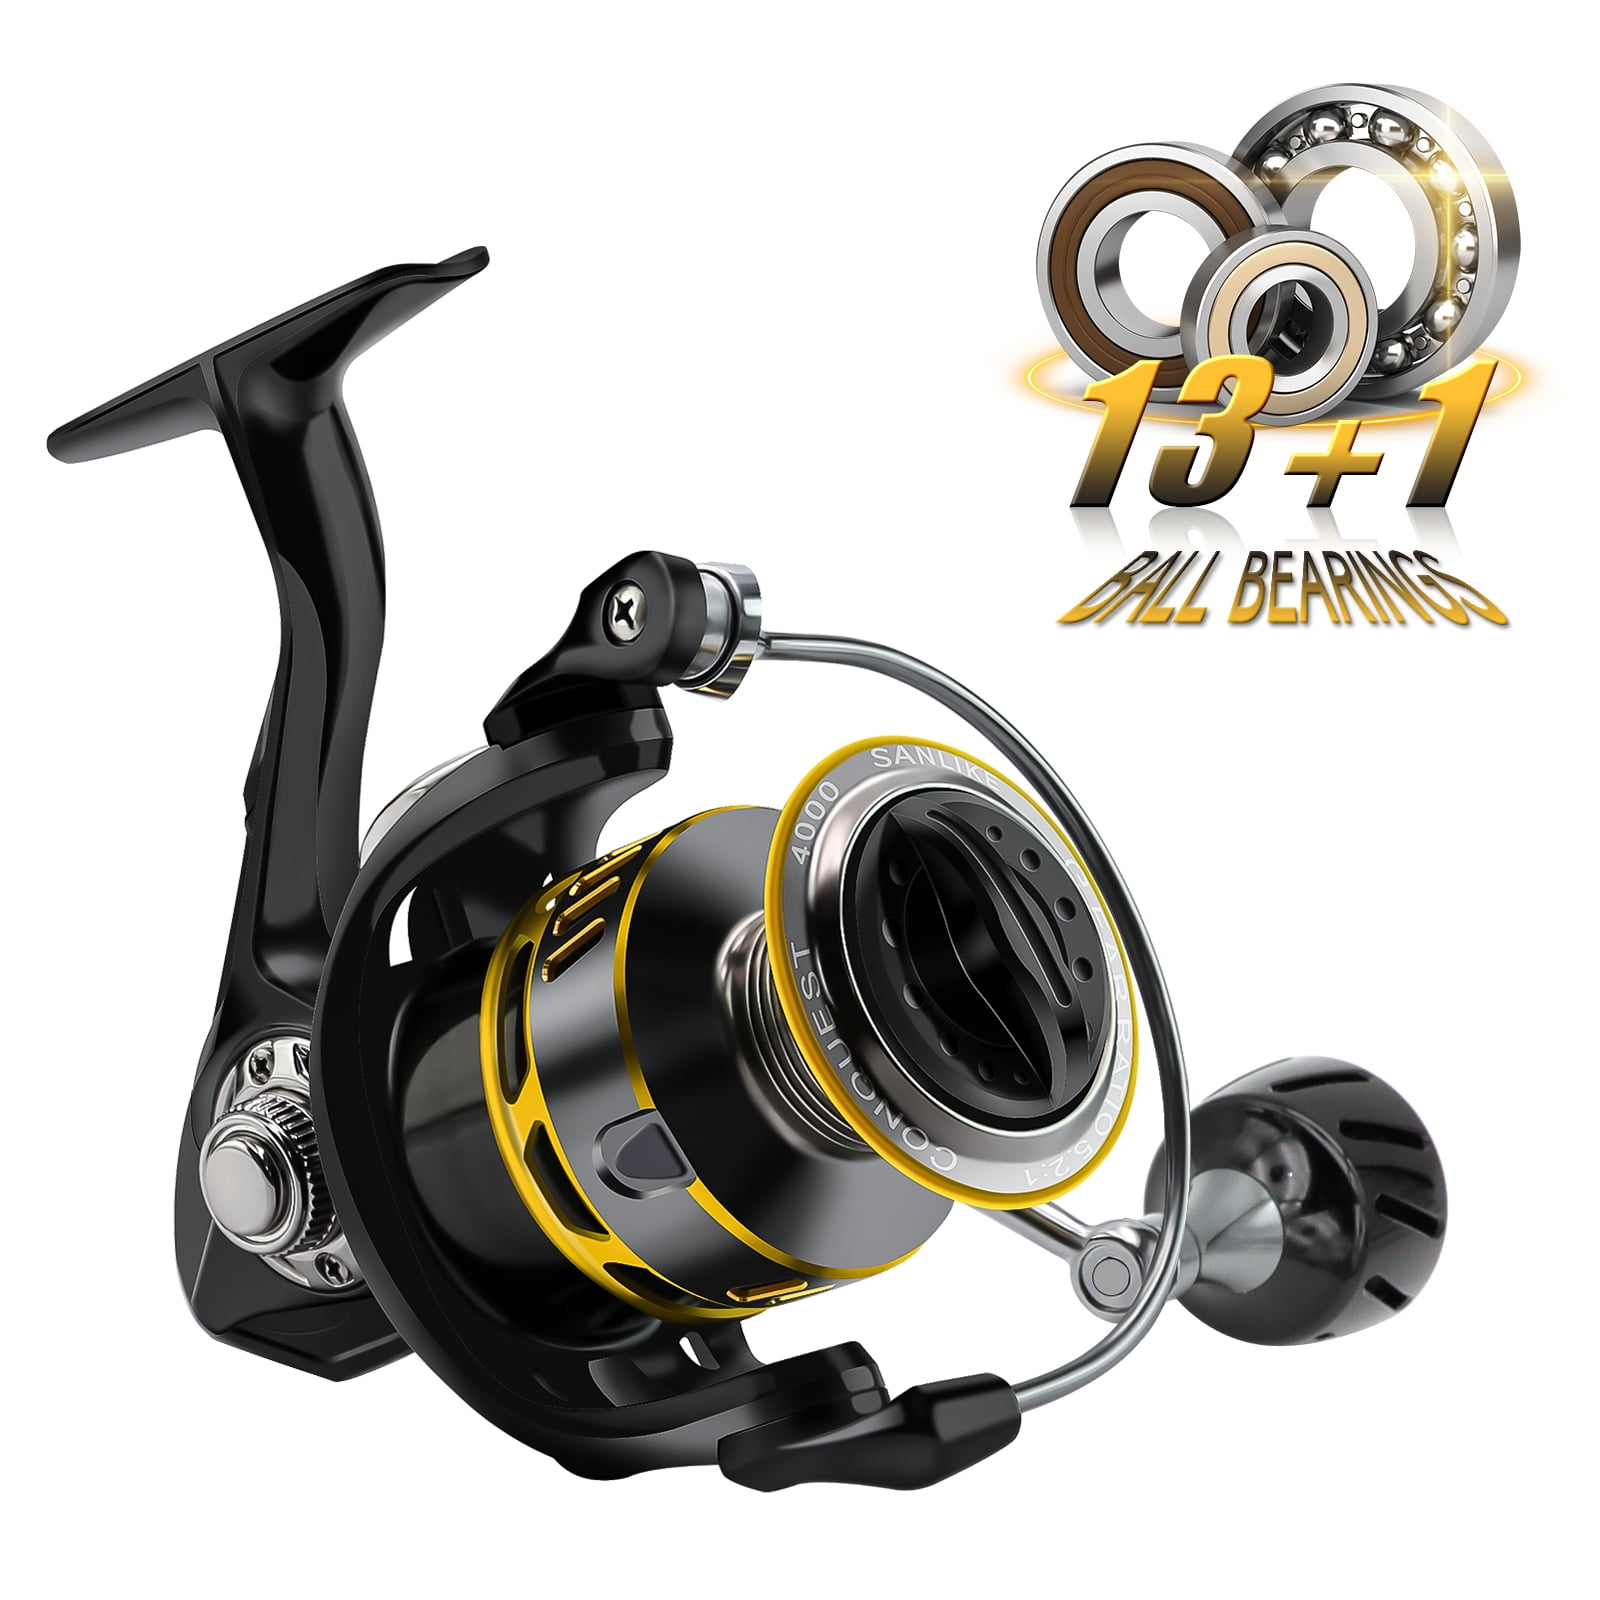 Ardent C Force Spinning Reel, 3000 size. 5.2:1 Gear Ratio 